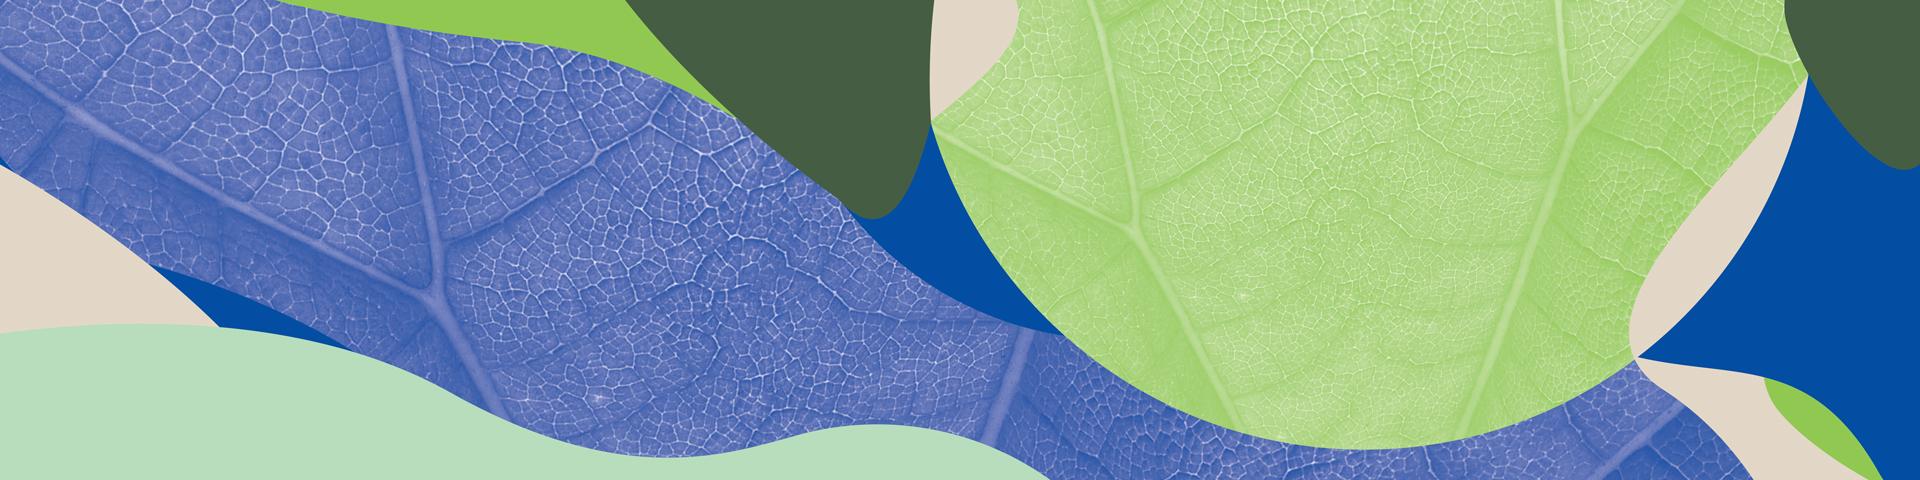 Abstract cover image in pale green, olive green, blue and cream tones.